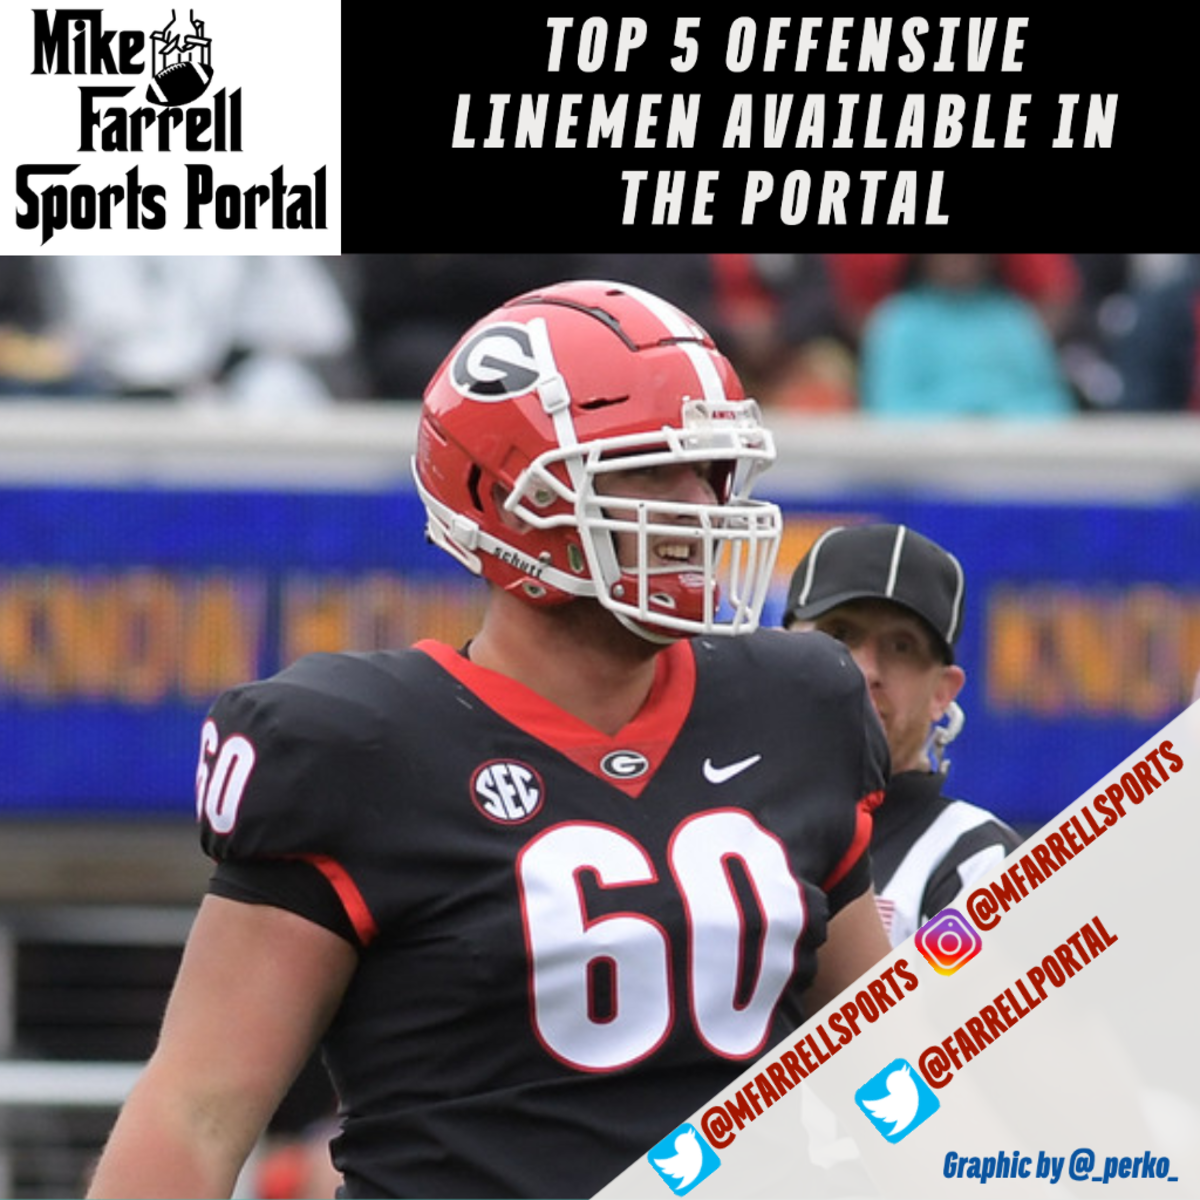 Top 5 Offensive Linemen Available in the Portal